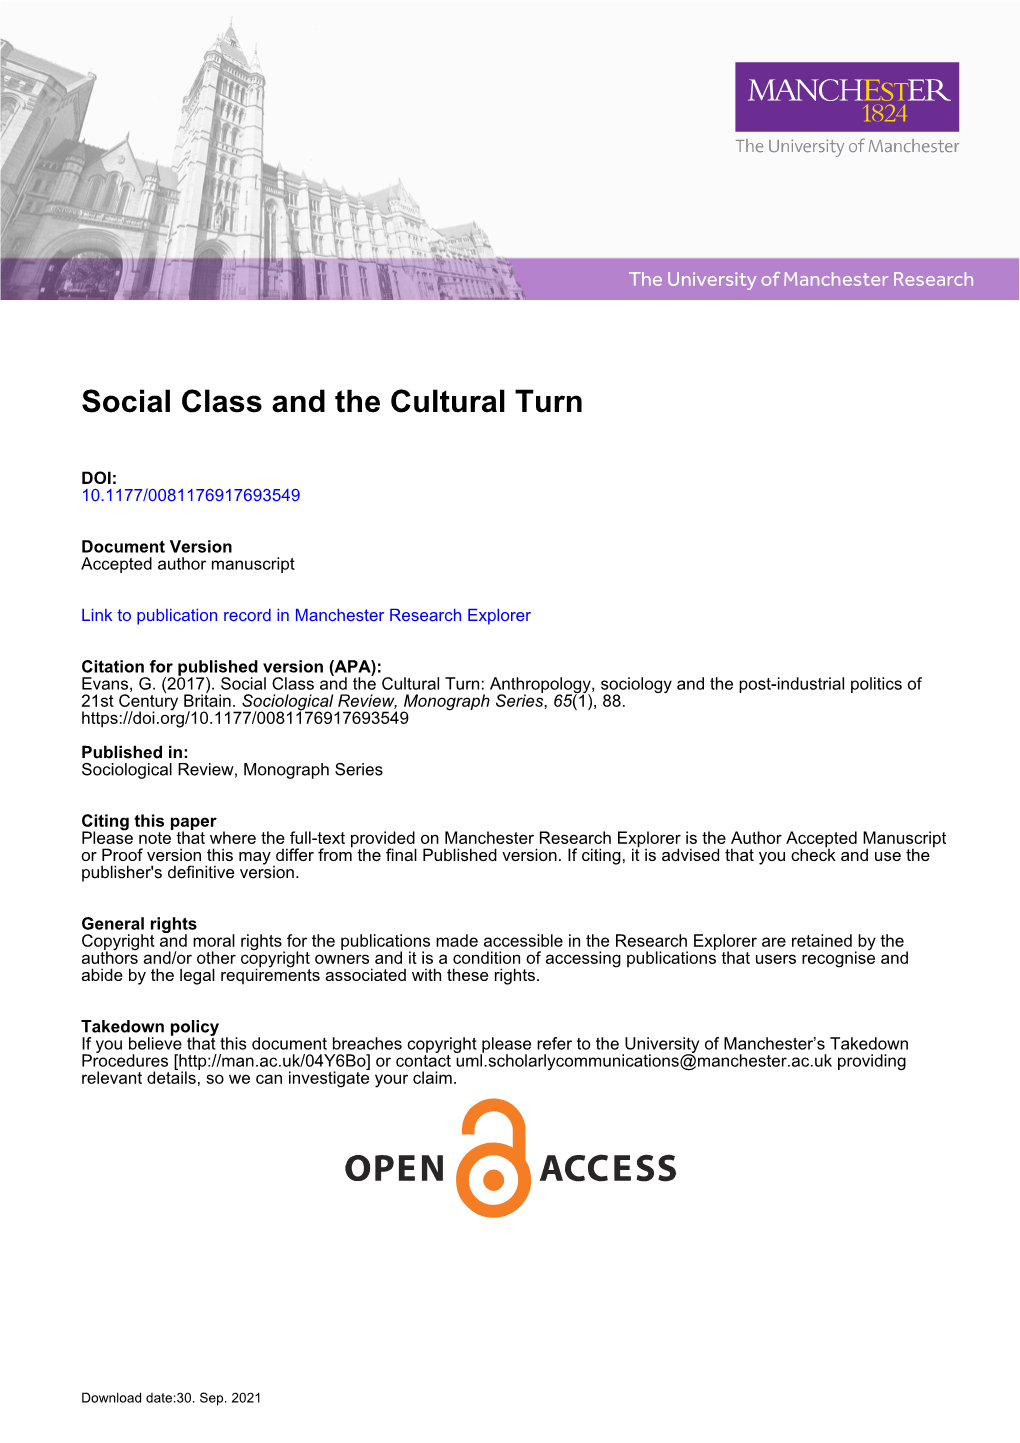 Social Class and the Cultural Turn